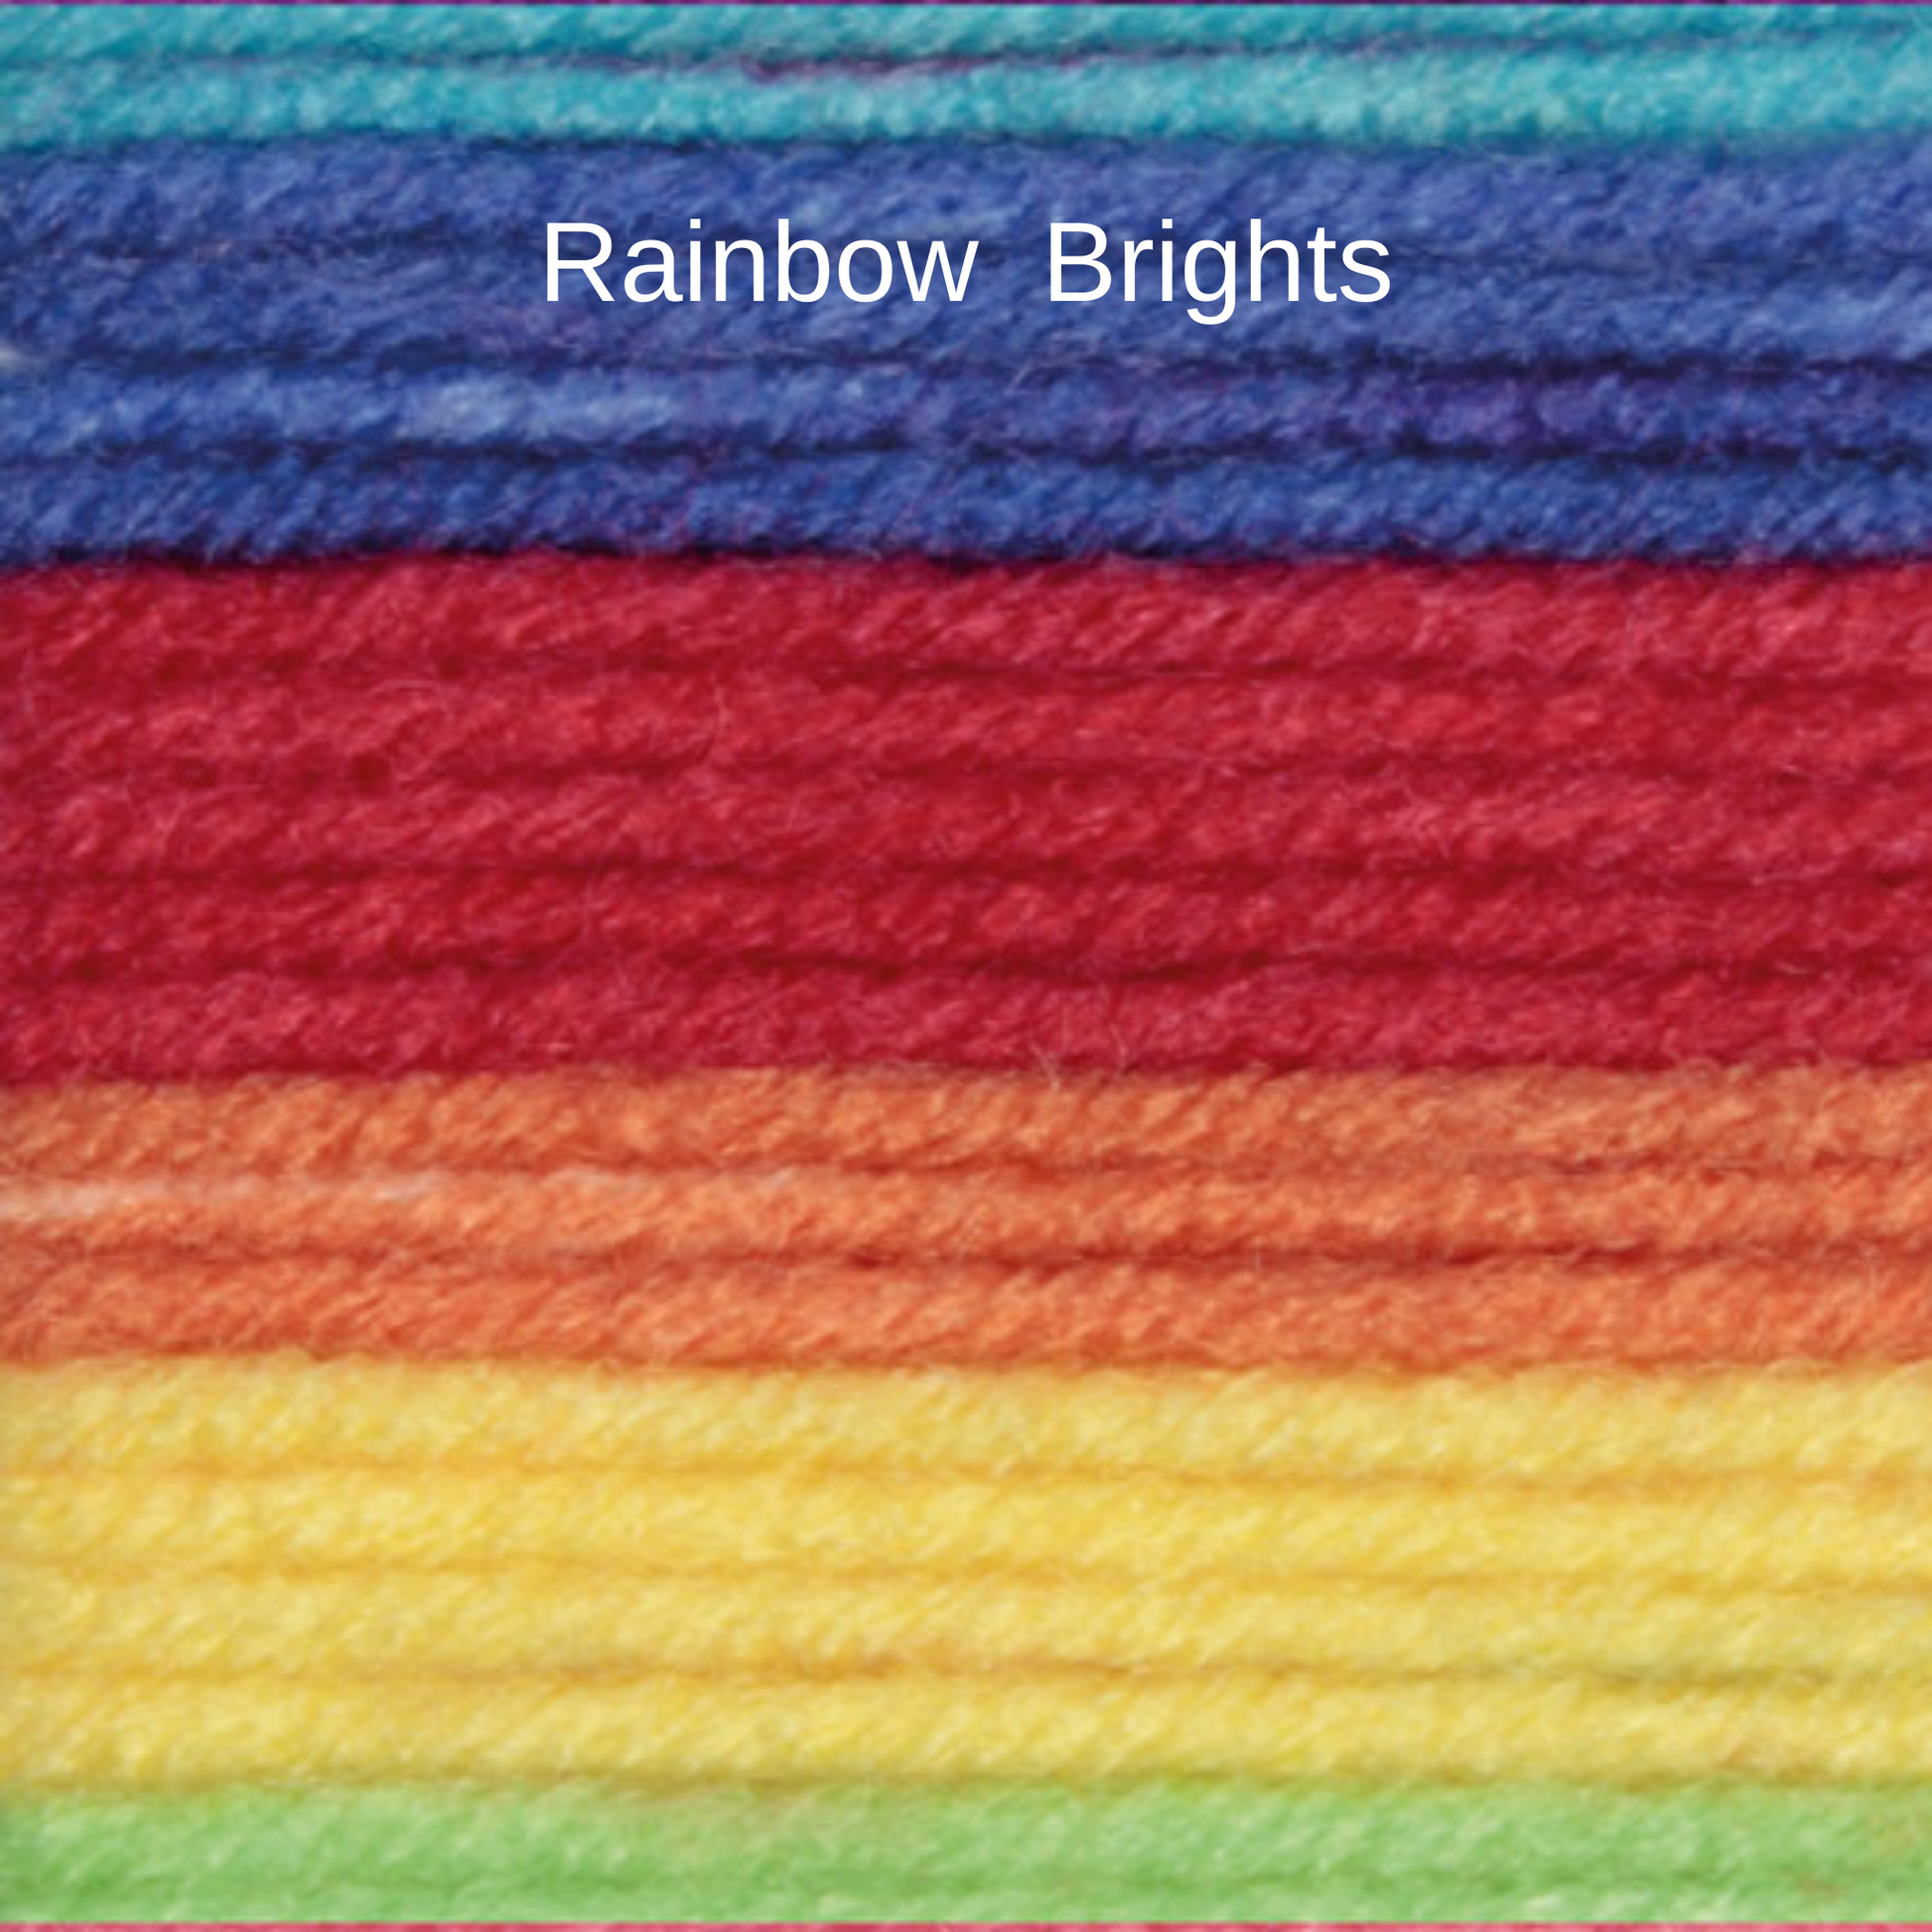 Colours in Rainbow Brights Wool option - Light Blue, Dark Blue, Red, Orange, Yellow and Green